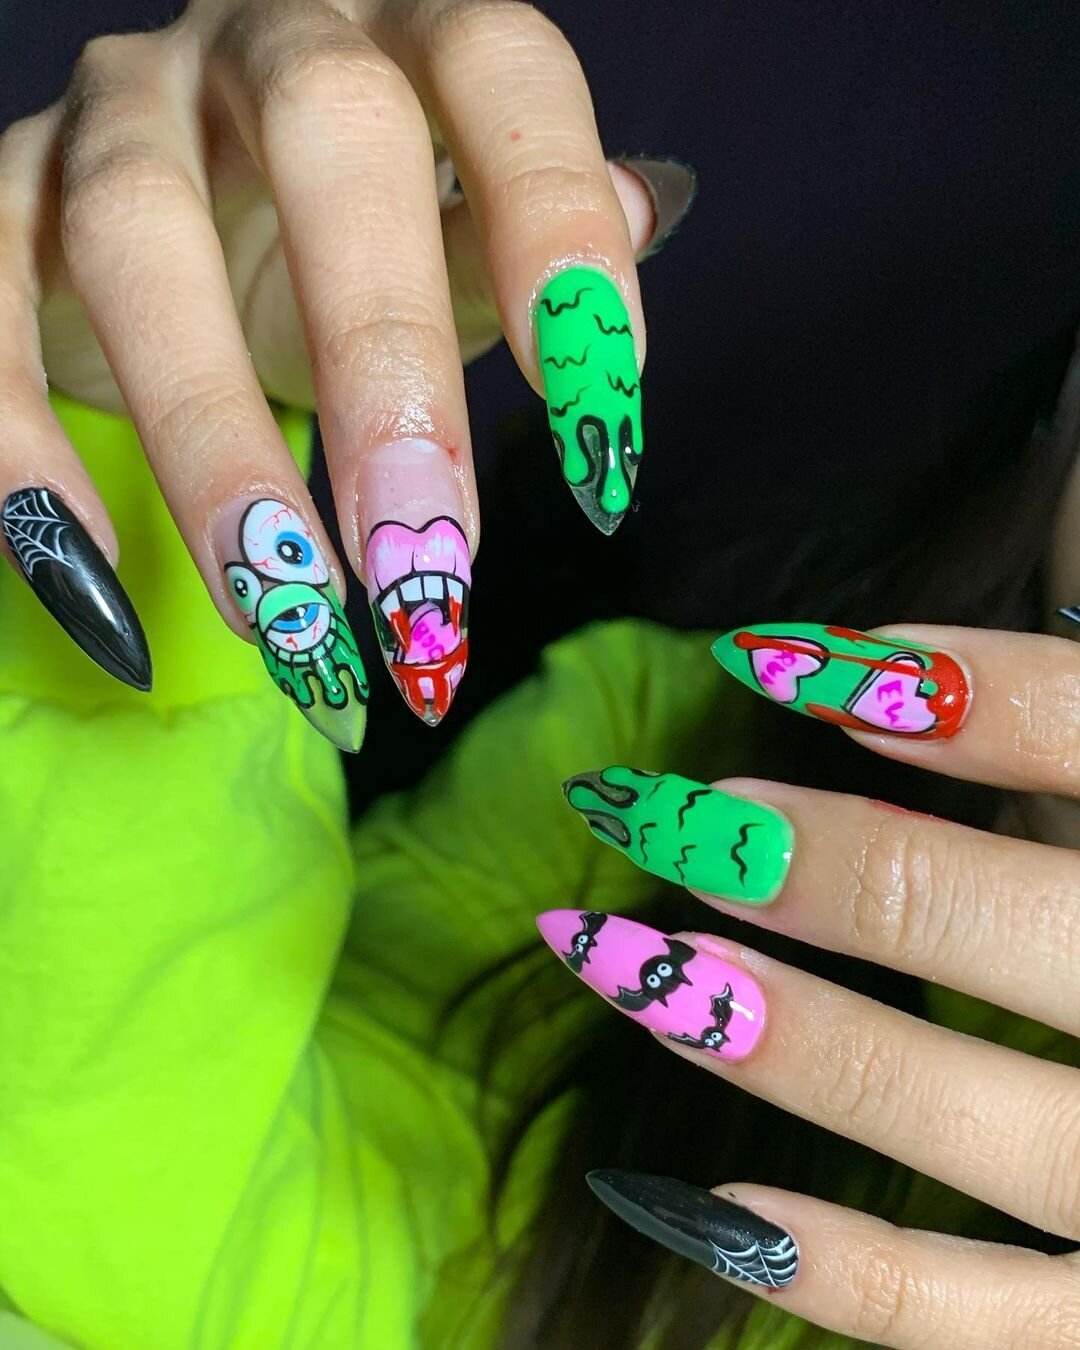 32. 35 Halloween Inspired Nail Designs